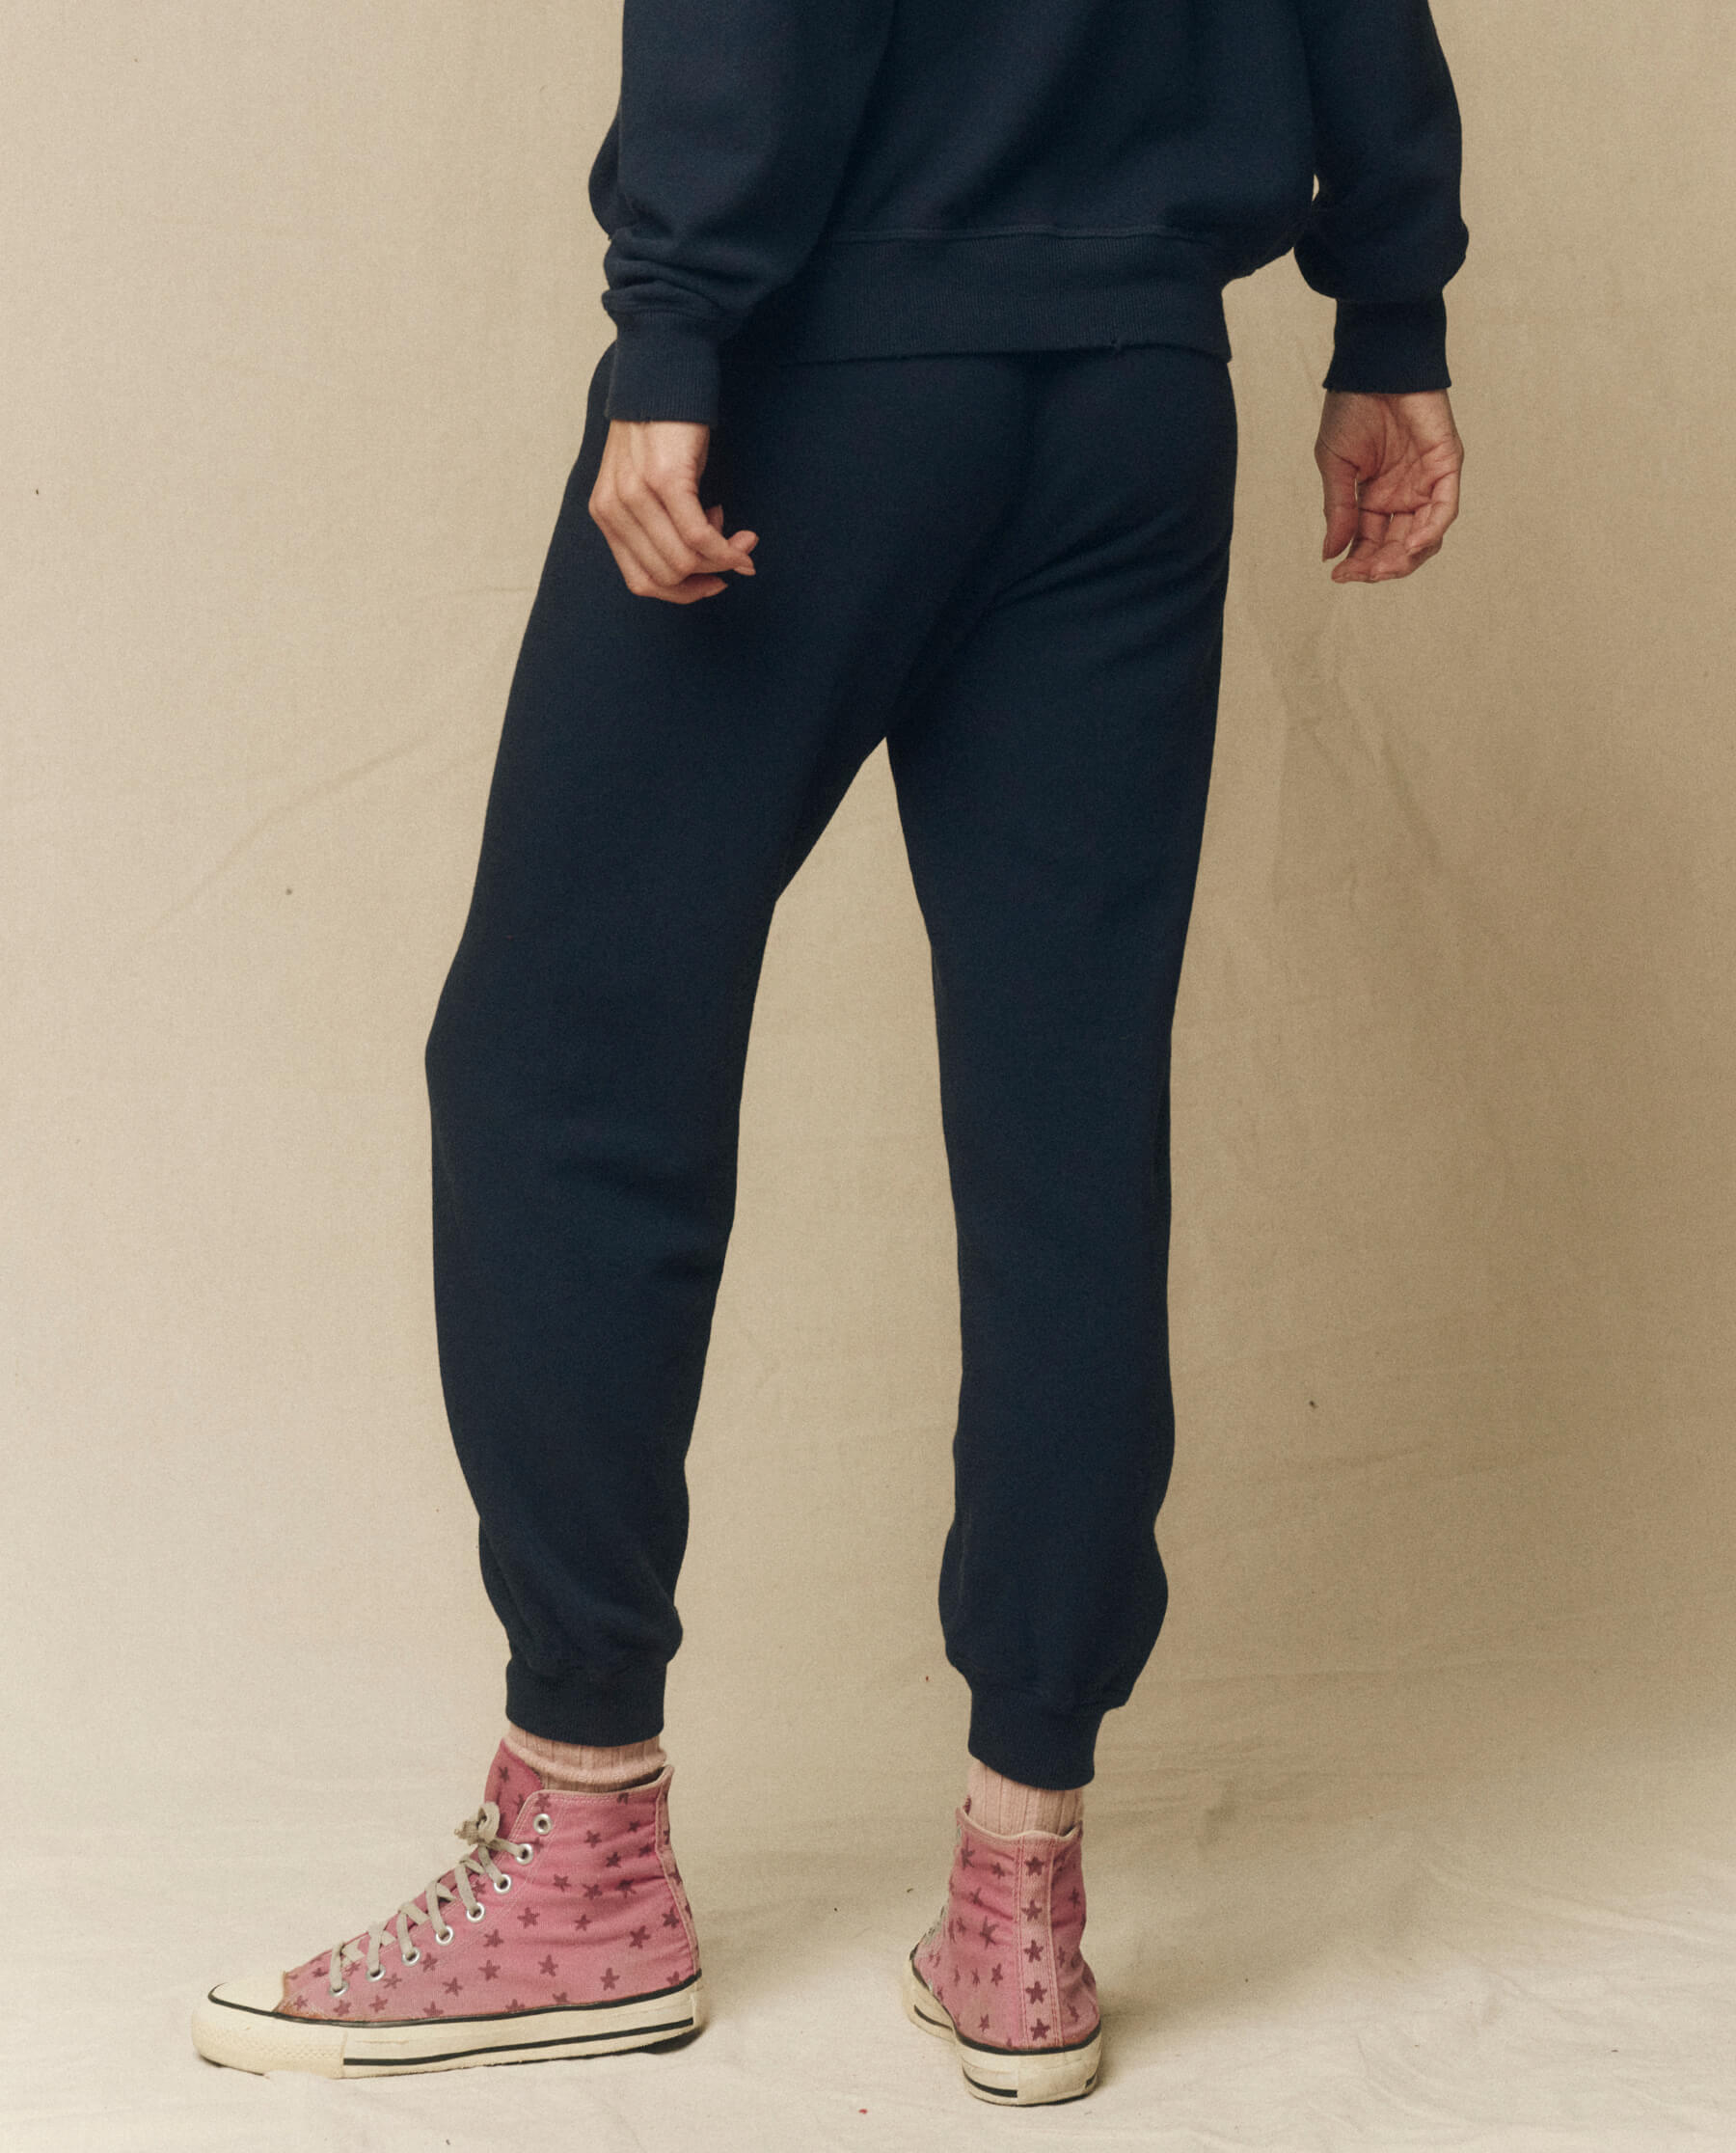 The Cropped Sweatpant. Solid -- True Navy SWEATPANTS THE GREAT. FALL 23 KNITS